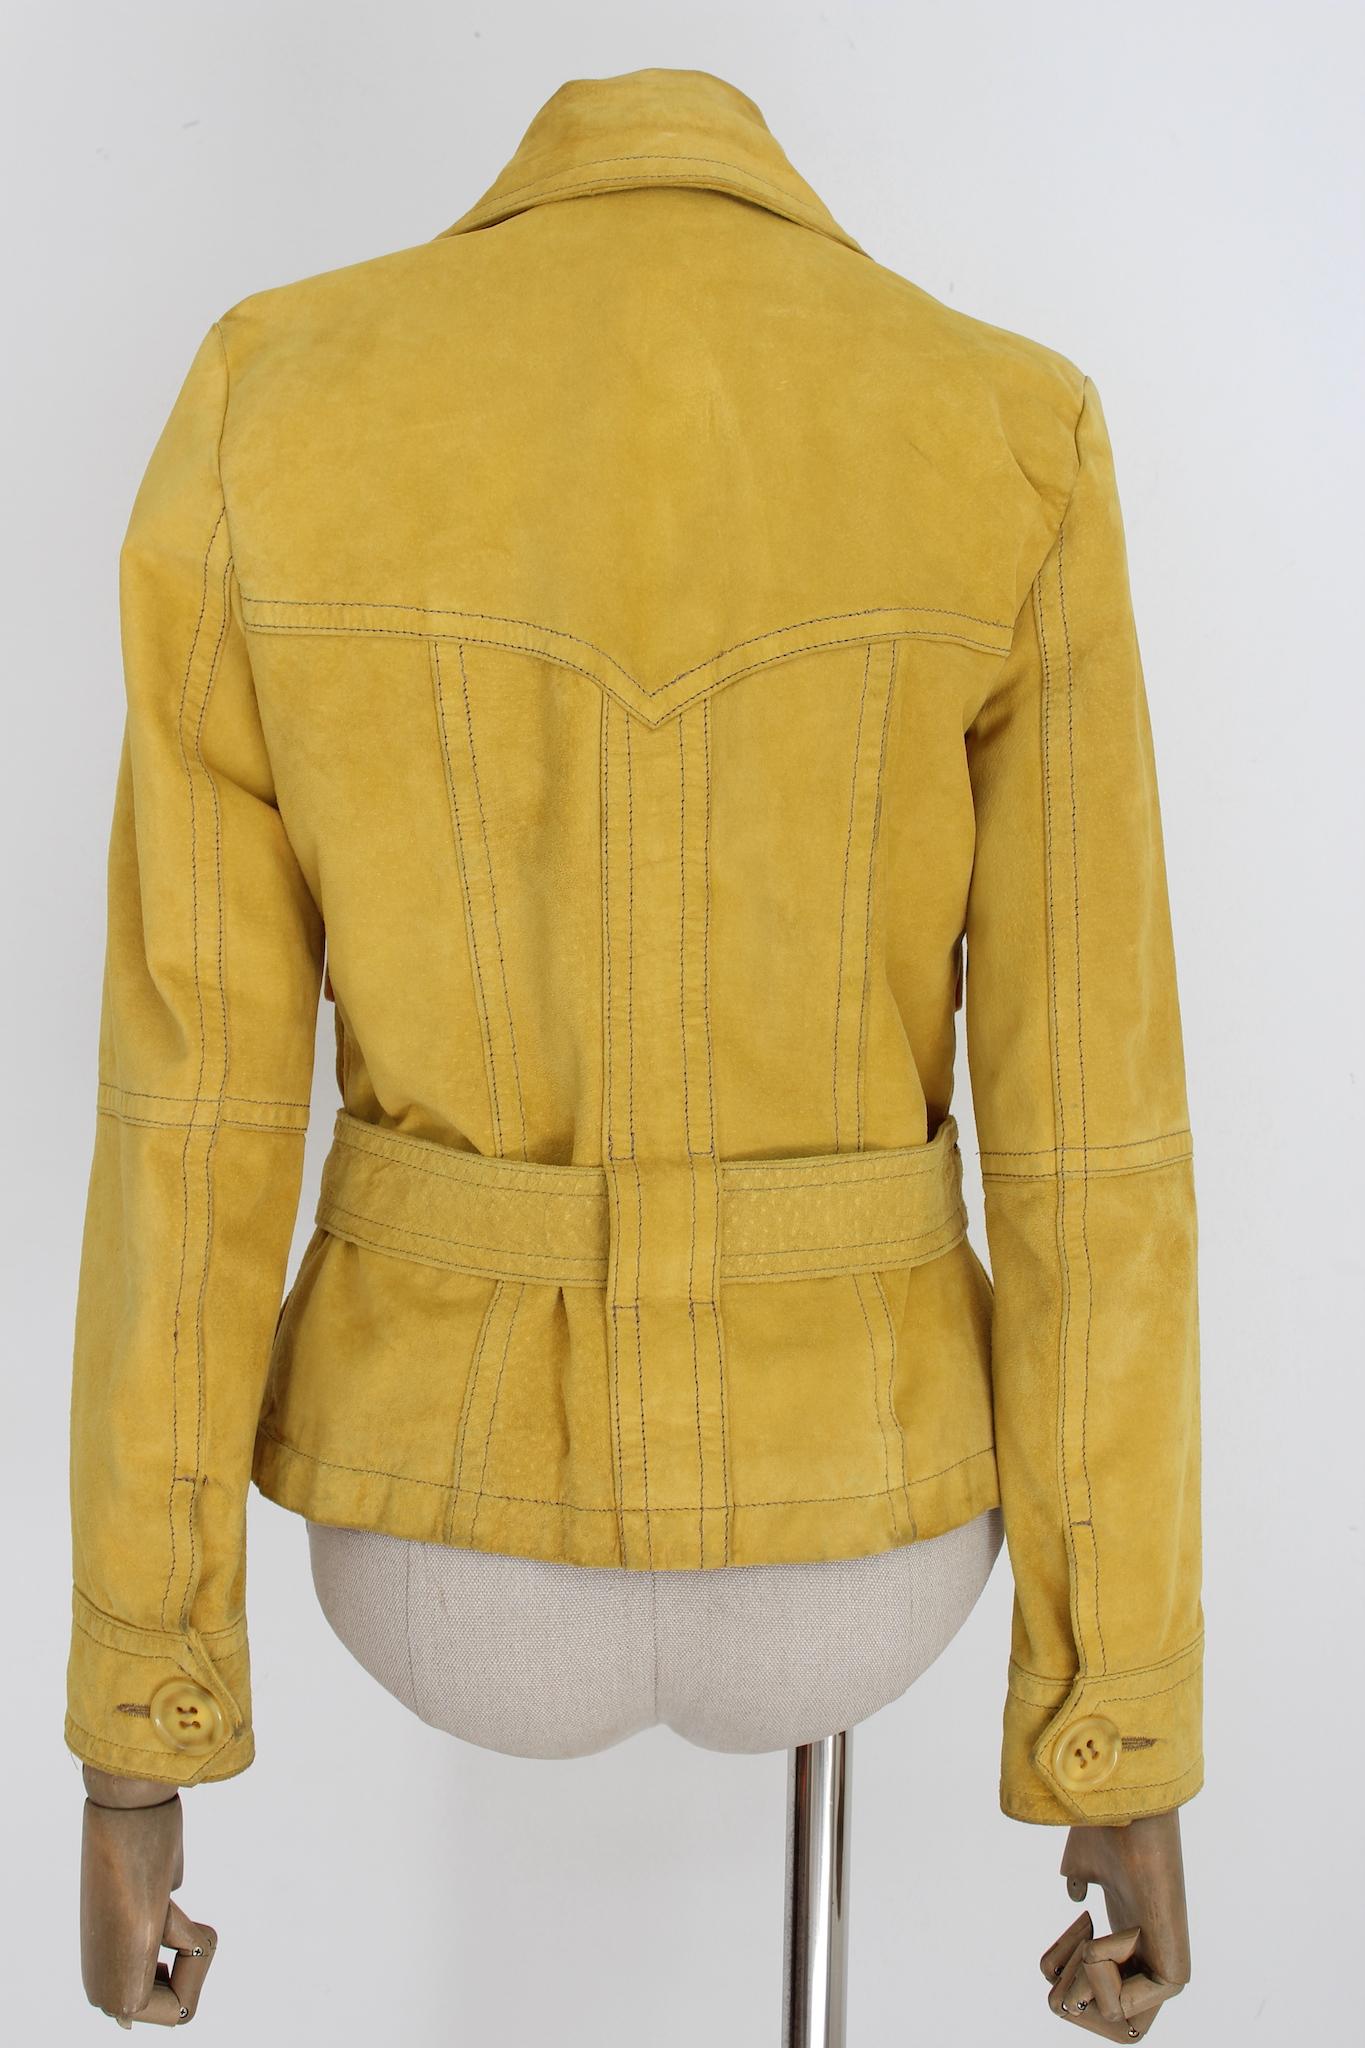 Max Mara 2000s yellow colored leather jacket. Fitted blazer, button fastening and belt at the waist, the black shaded color, gives a worn look. 100% pig leather fabric, internally lined. Made in Italy.

Size: 44 It 10 Us 12 Uk

Shoulder: 42 cm
Bust